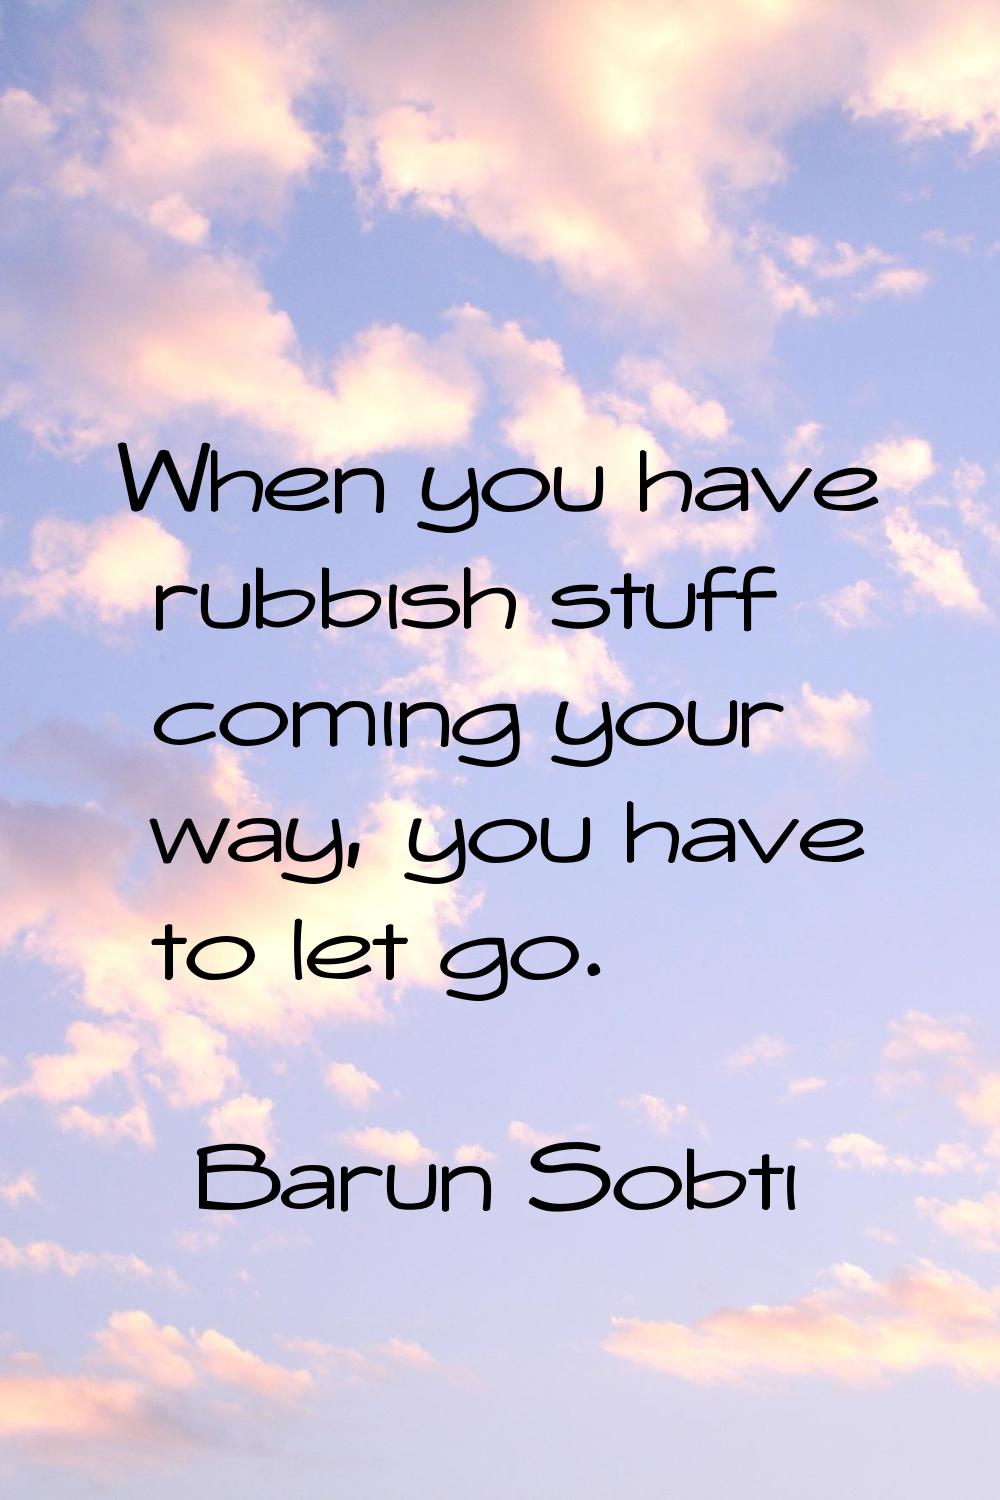 When you have rubbish stuff coming your way, you have to let go.